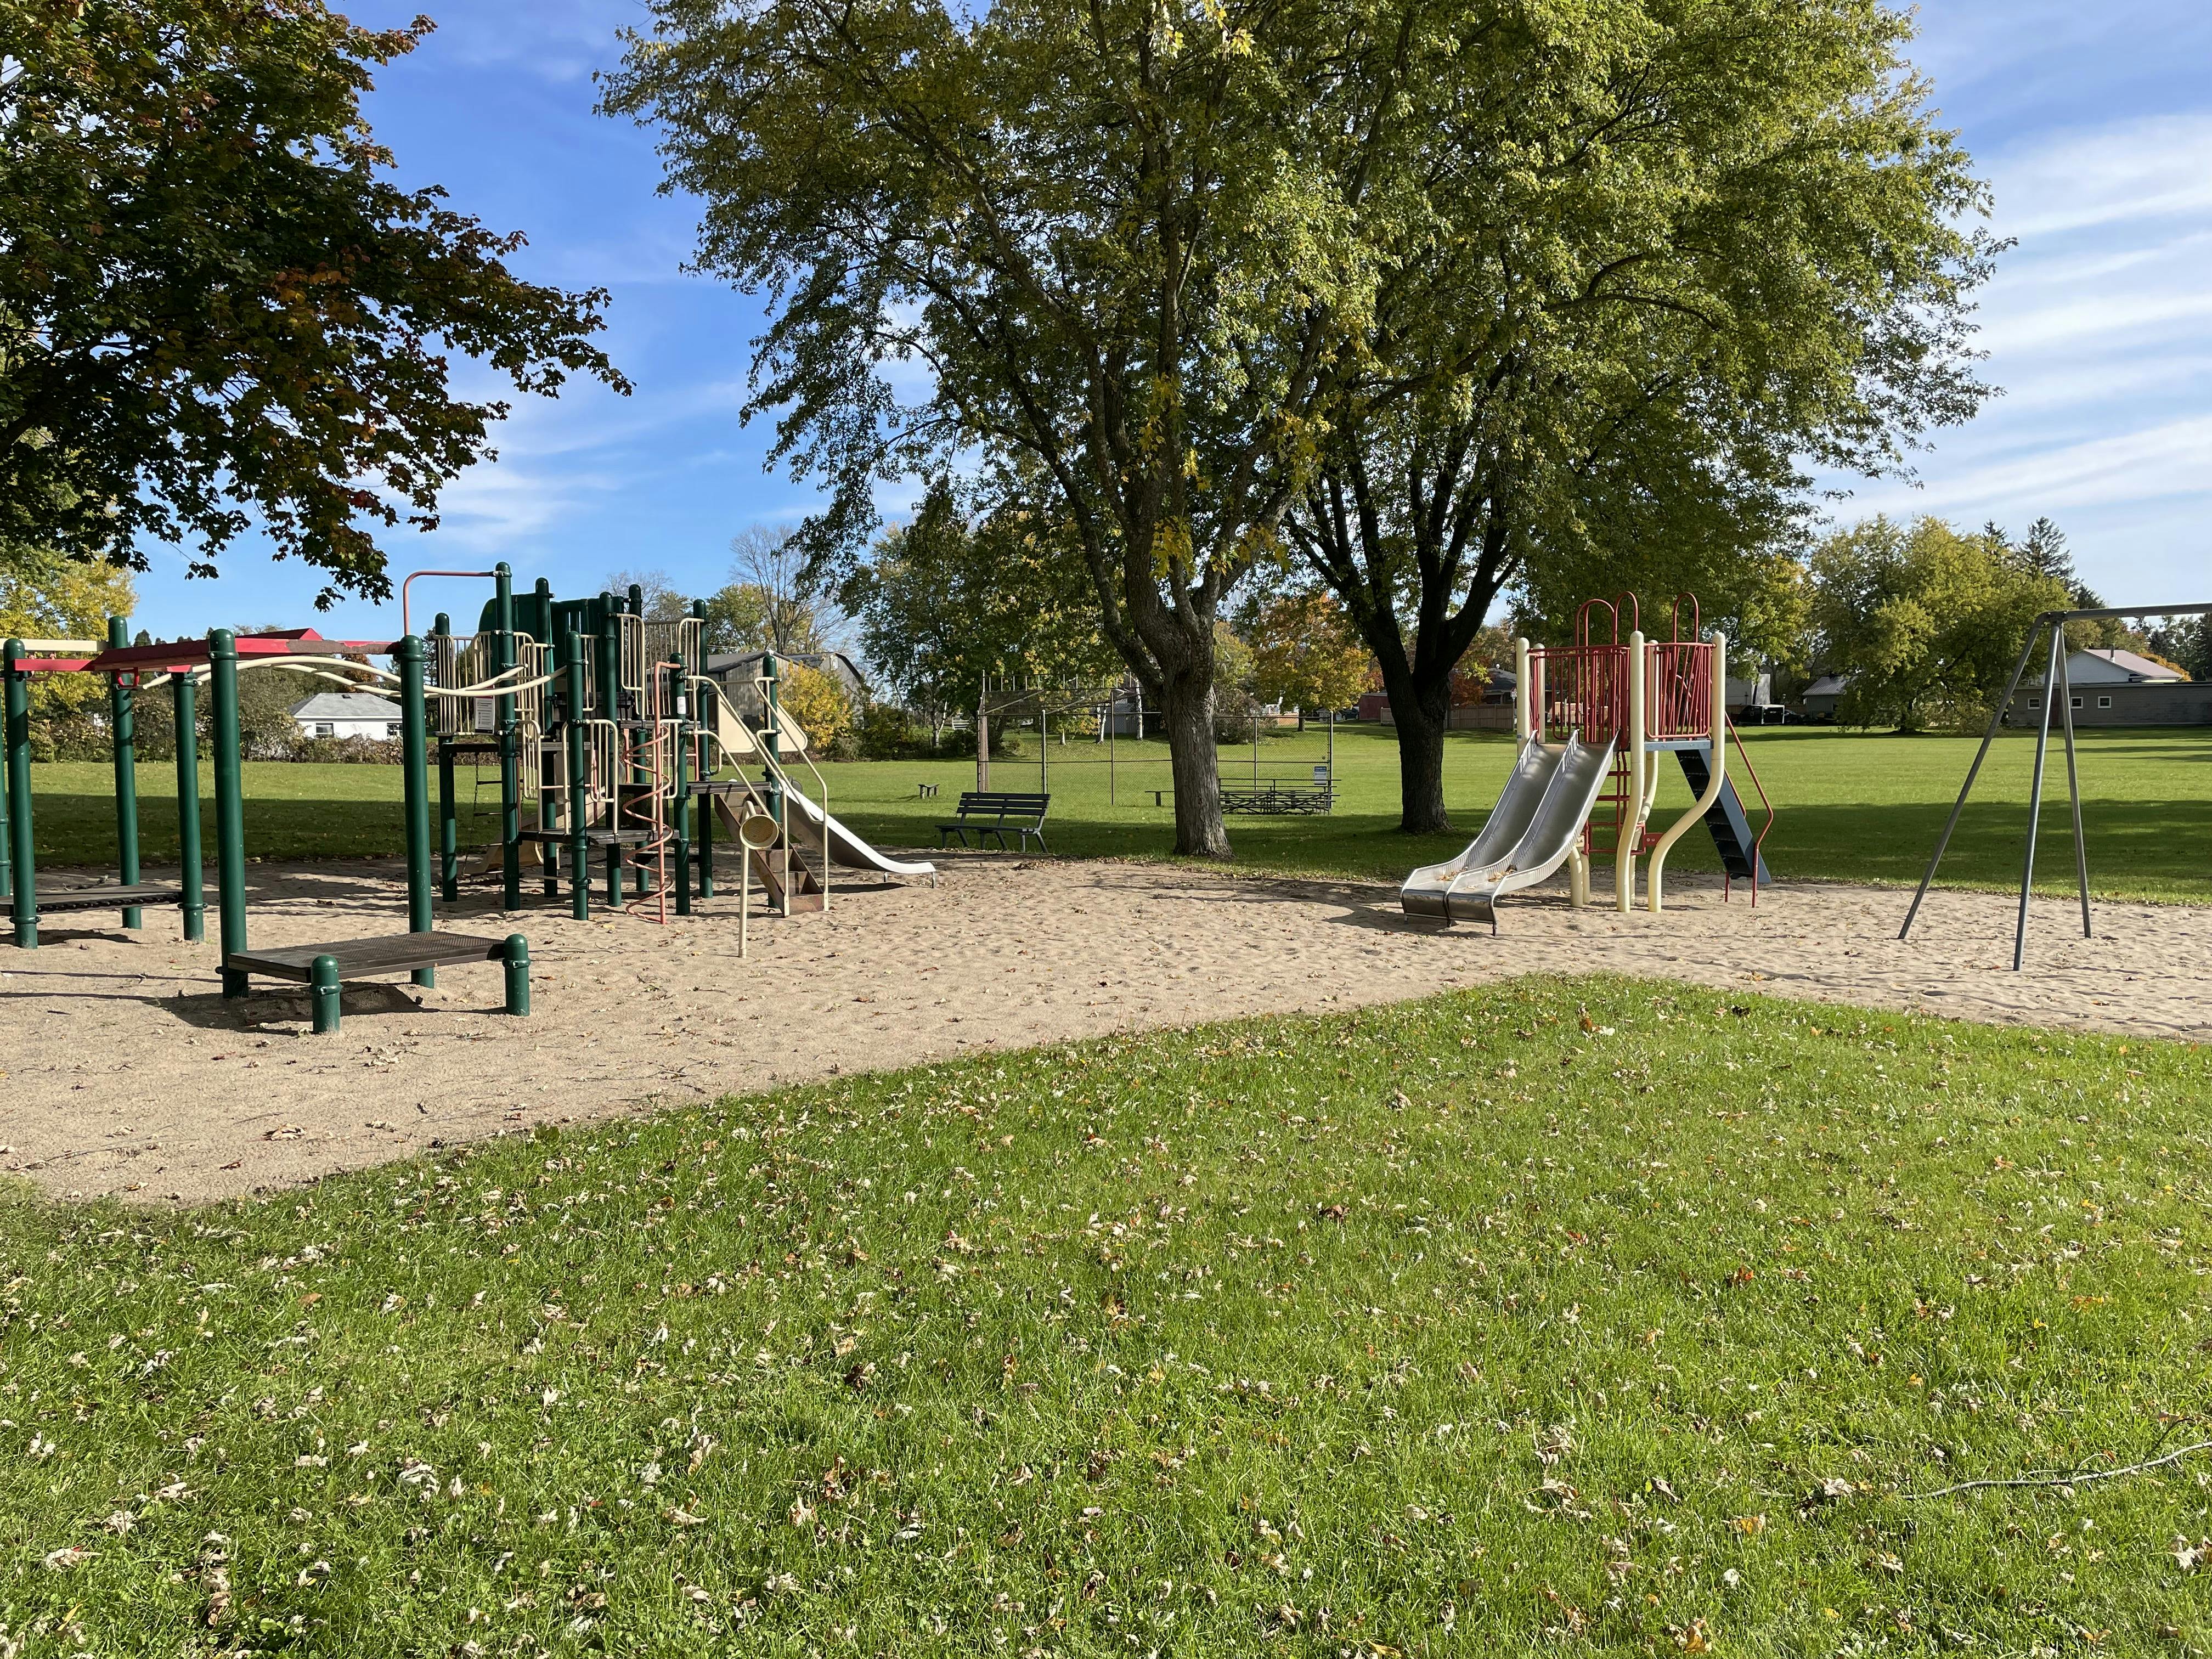 Existing Play Structures